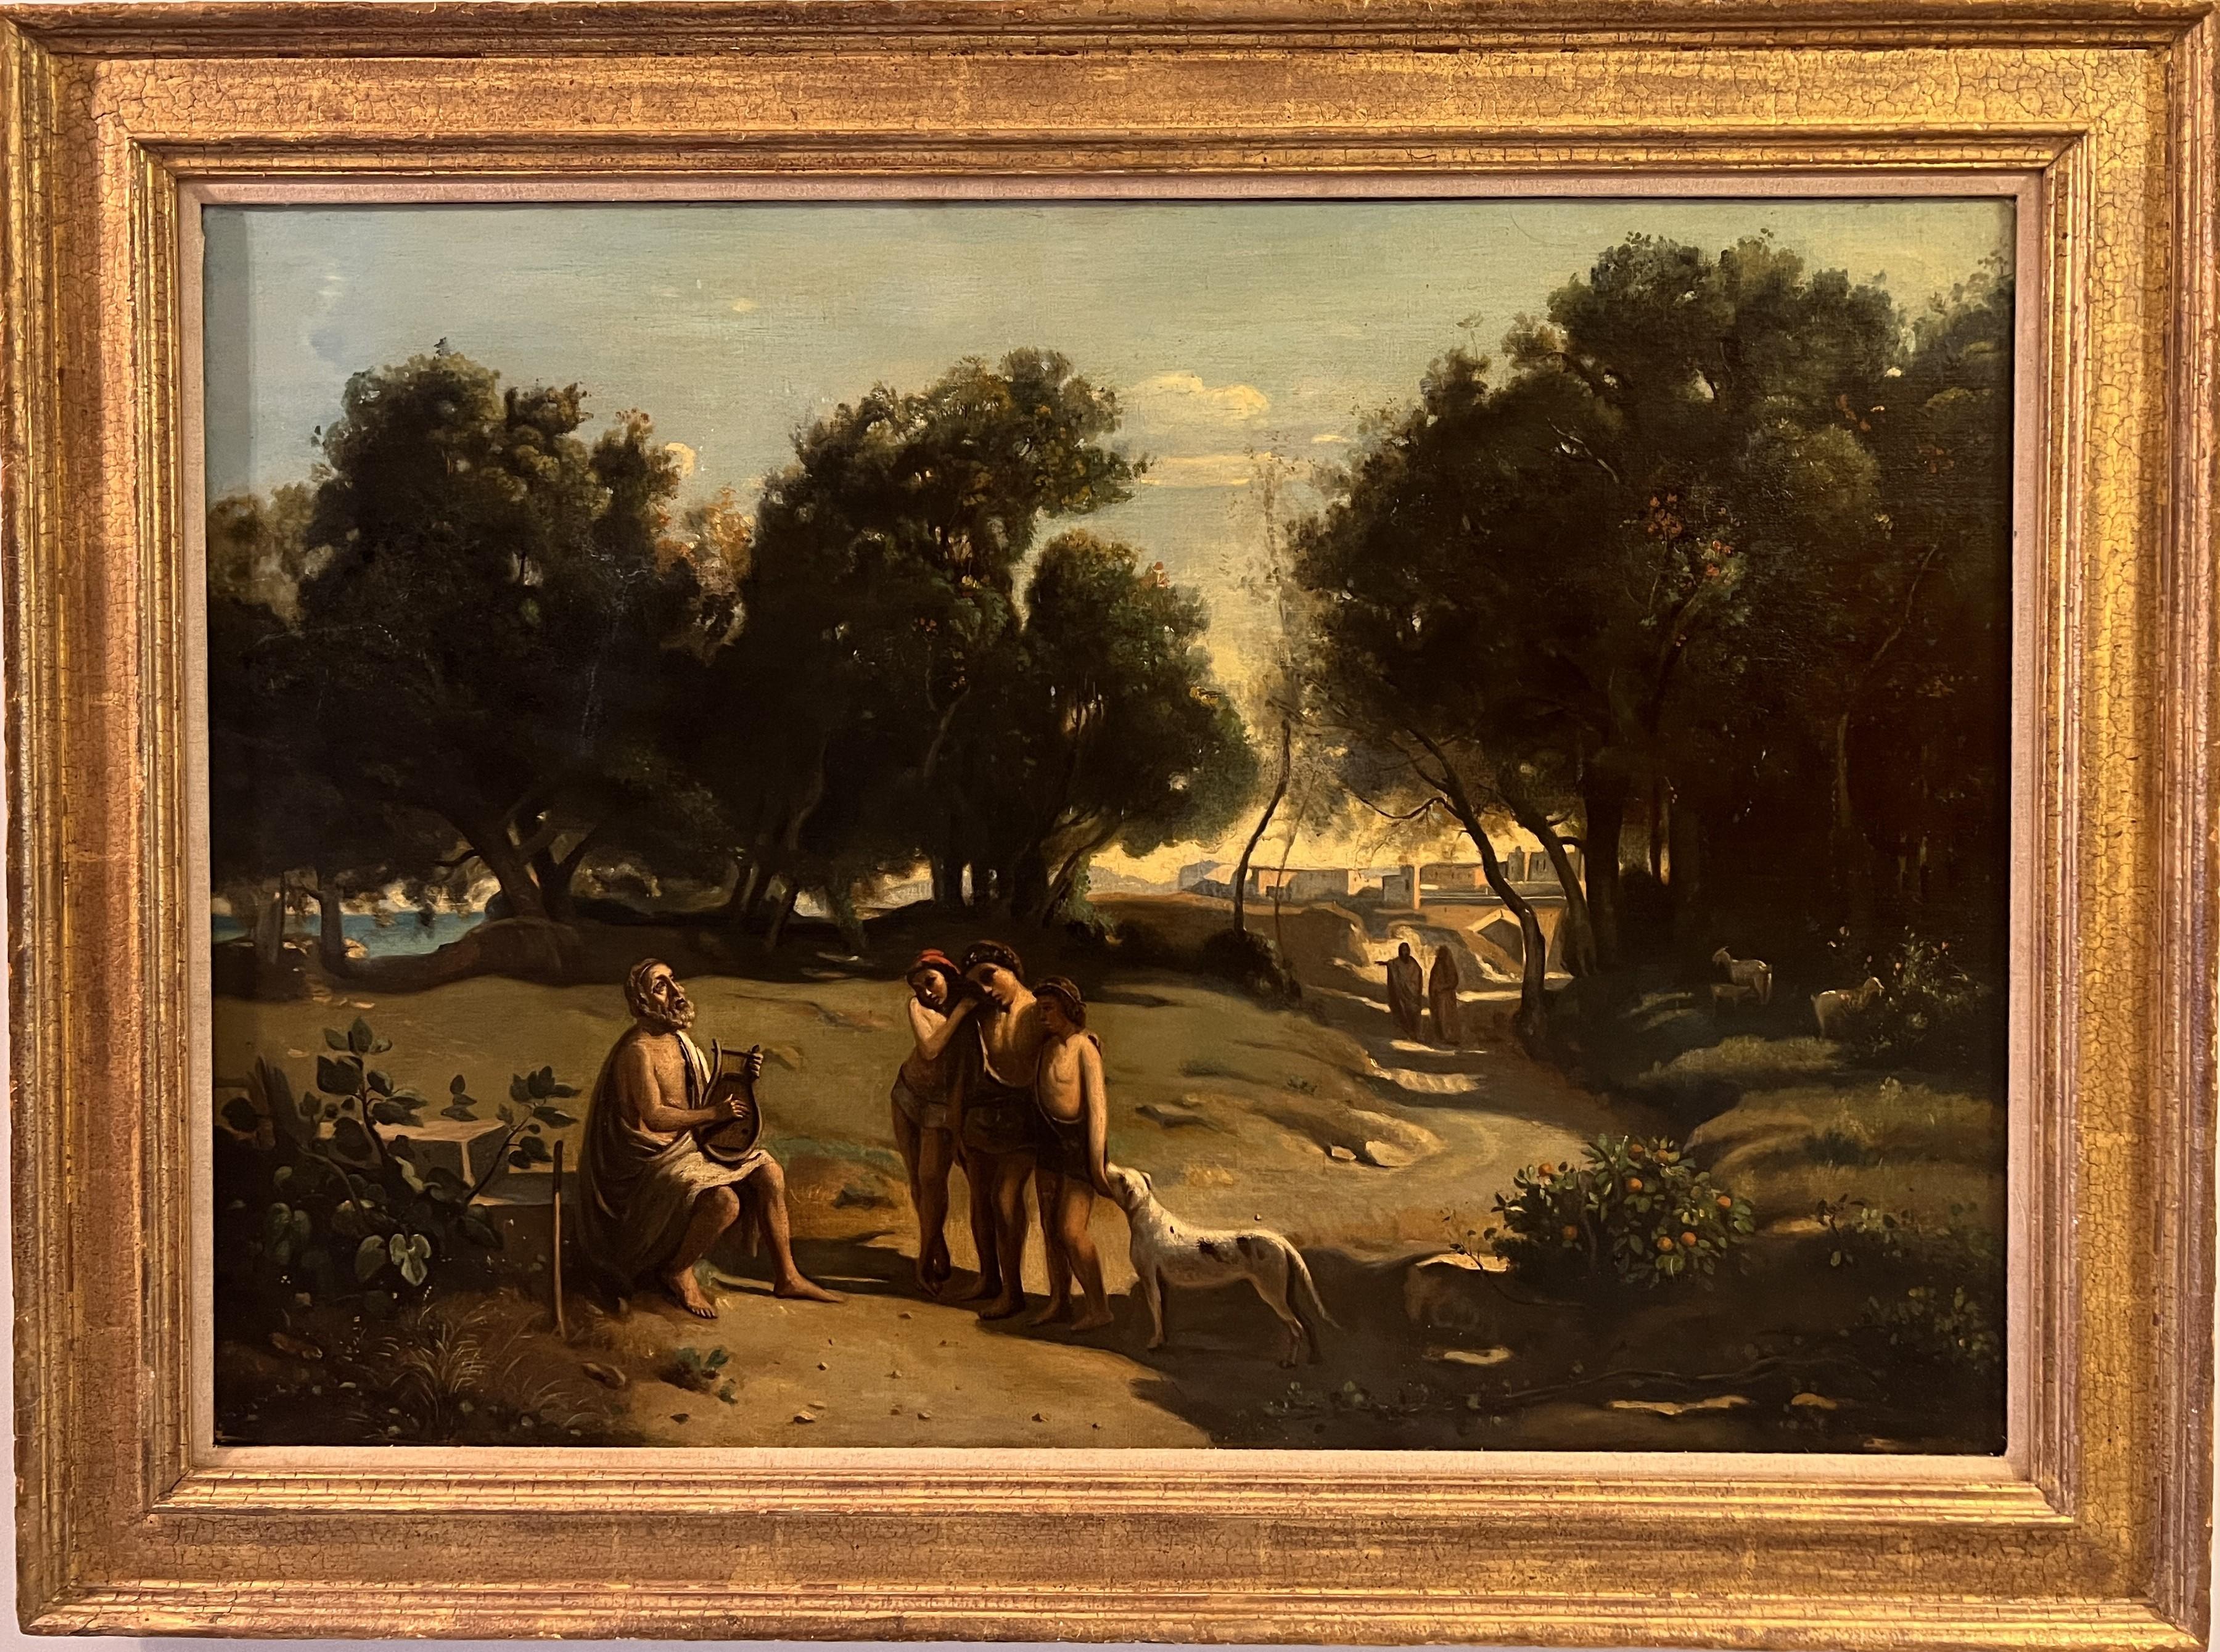 Unknown Landscape Painting - Antique 19C. Oil painting on canvas, neoclassical Scene, Homer playing his Lyre